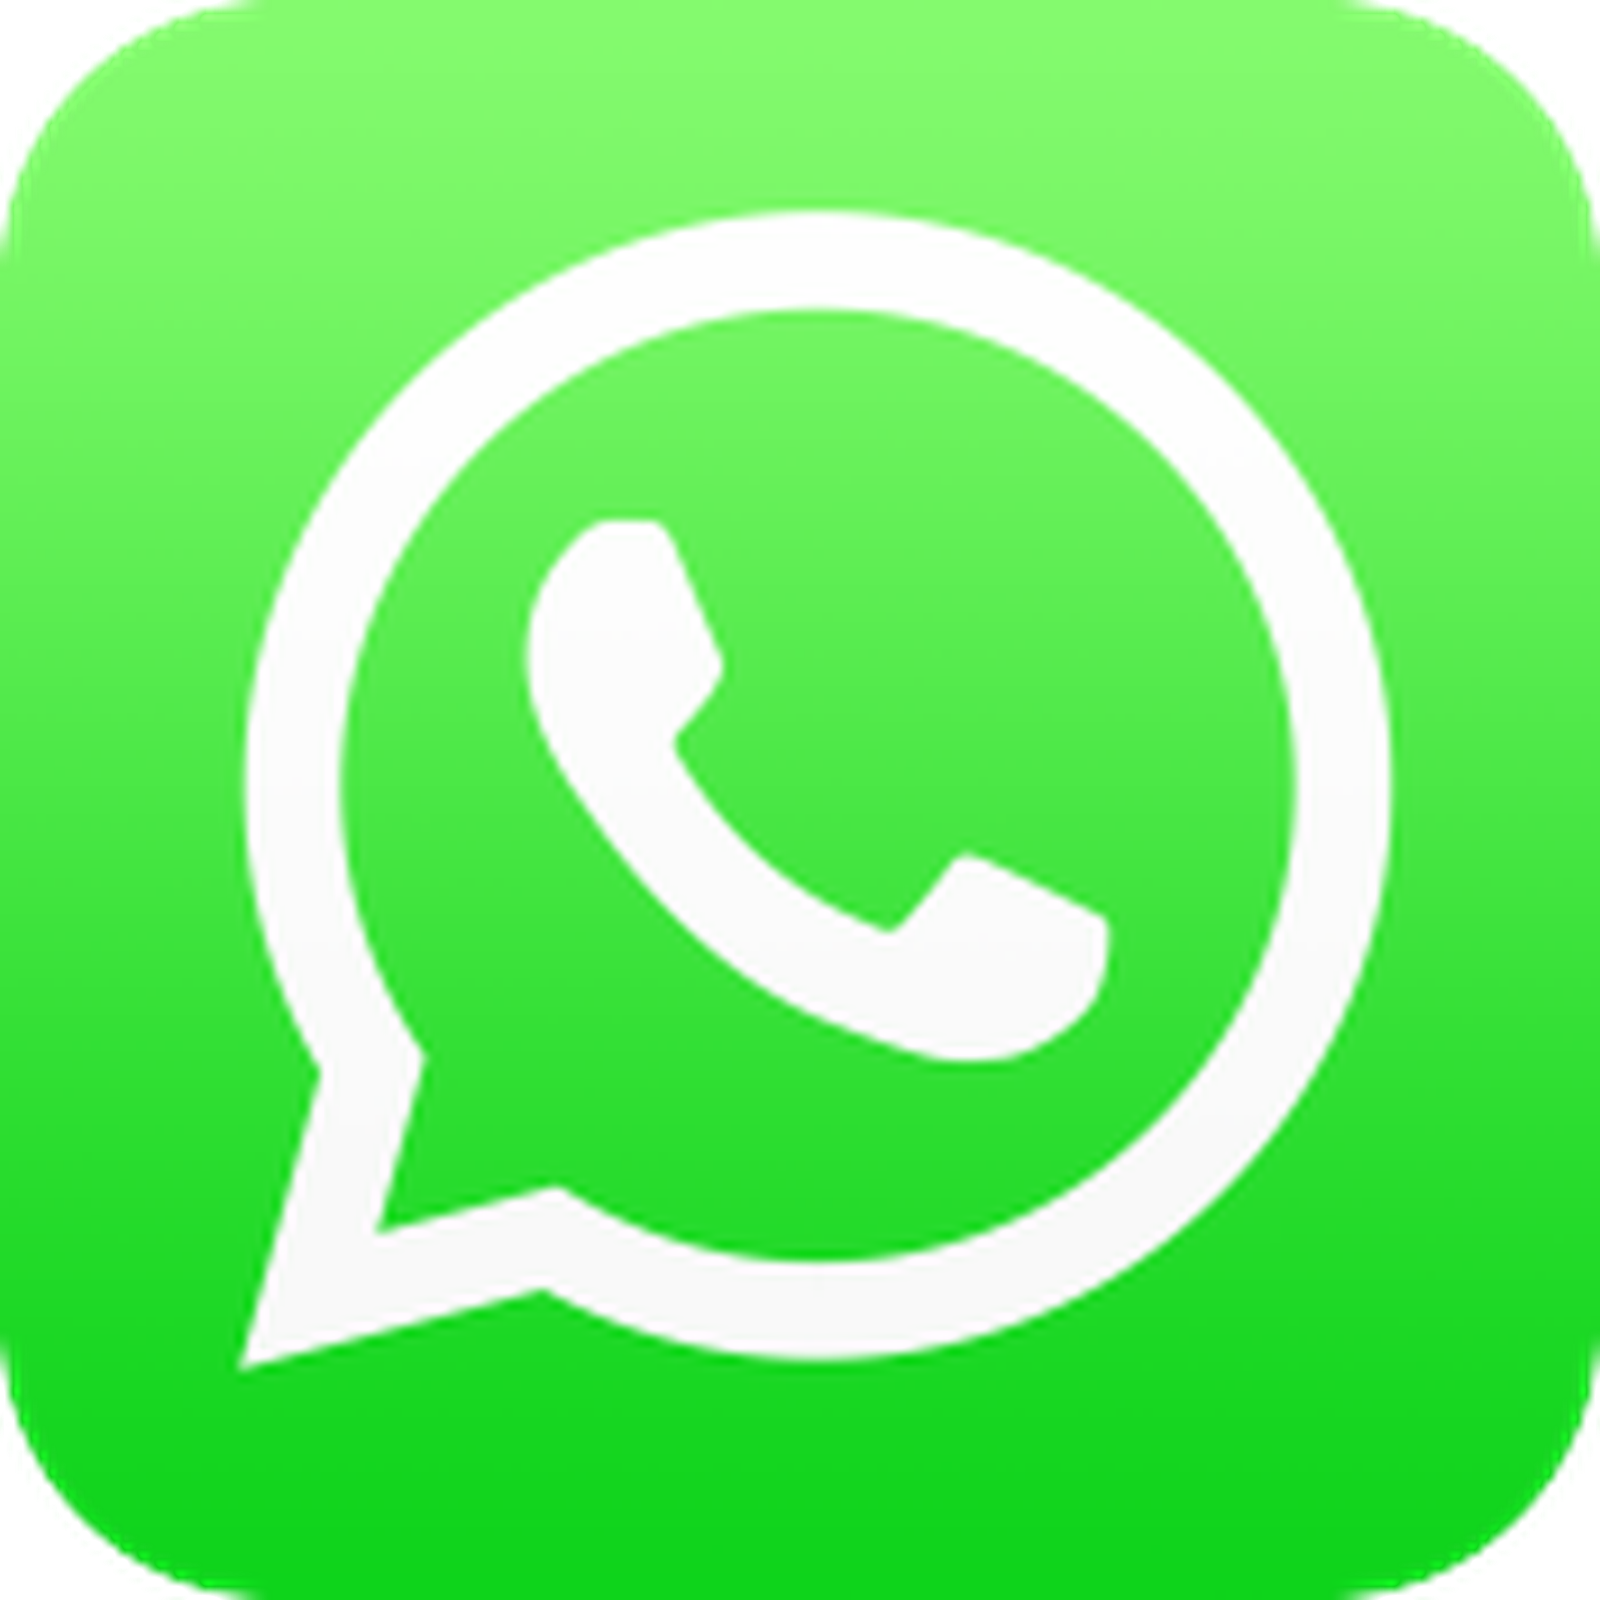 WhatsApp Messenger Implements Full End-to-End Encryption - MacRumors